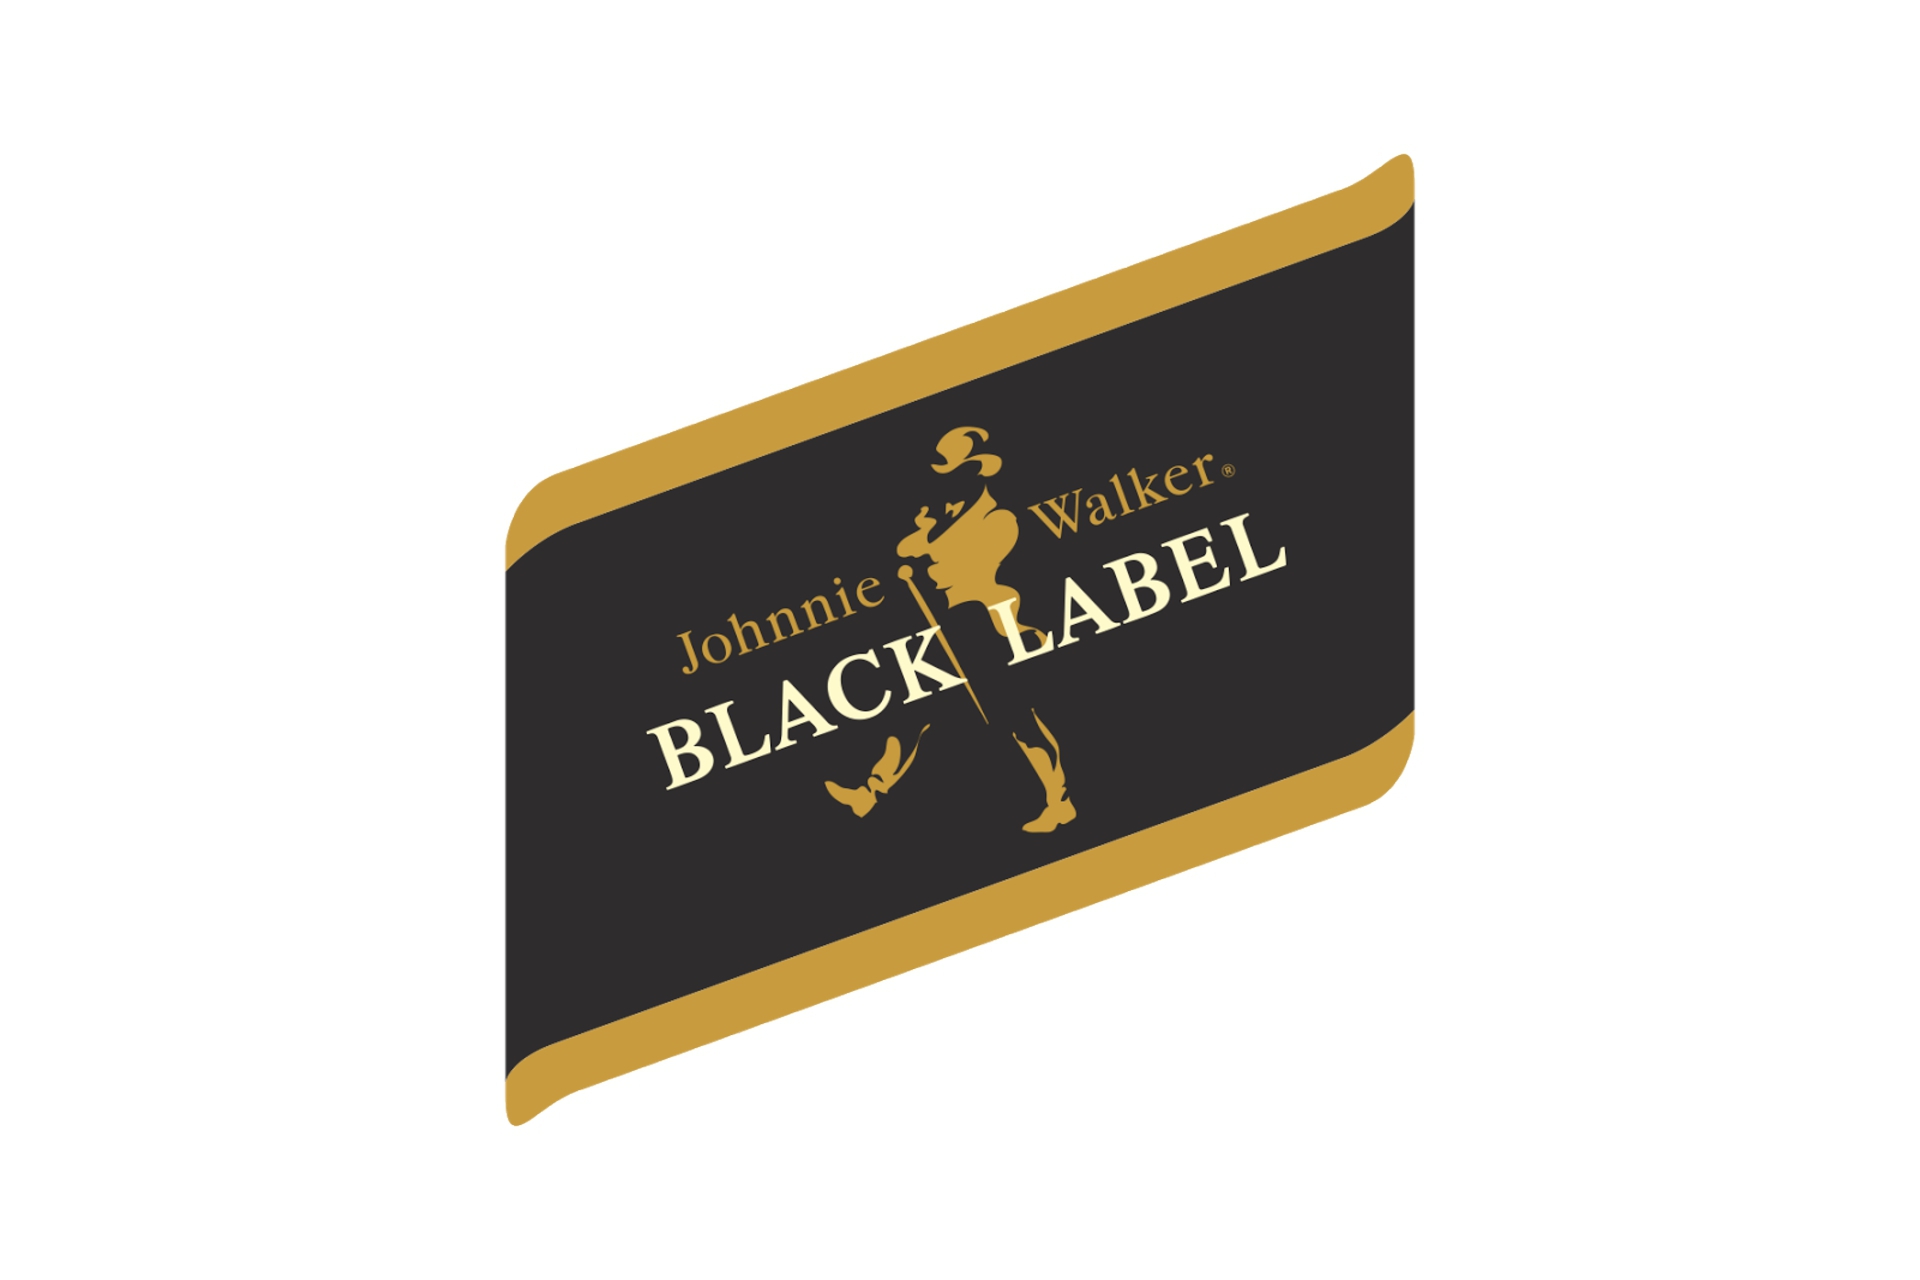 Carling Black Label Projects :: Photos, videos, logos, illustrations and  branding :: Behance